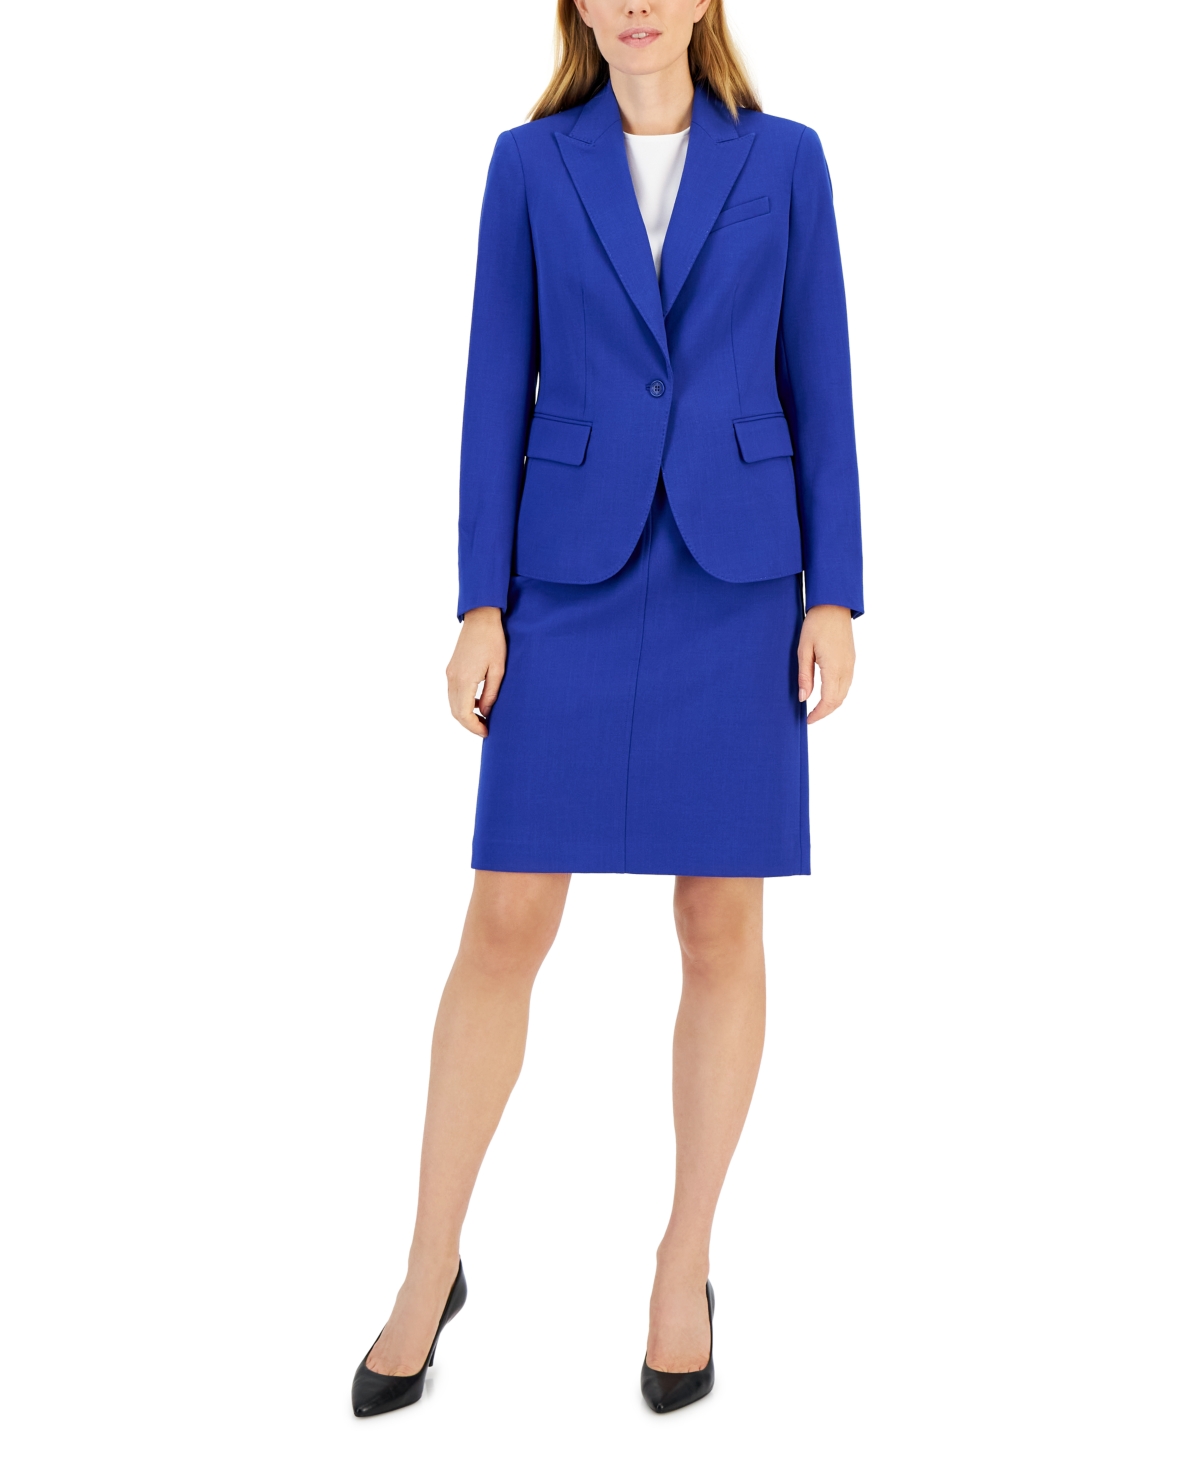 Anne Klein Executive Collection Single-button A-line Skirt Suit, Created For Macy's In Royal Sapphire